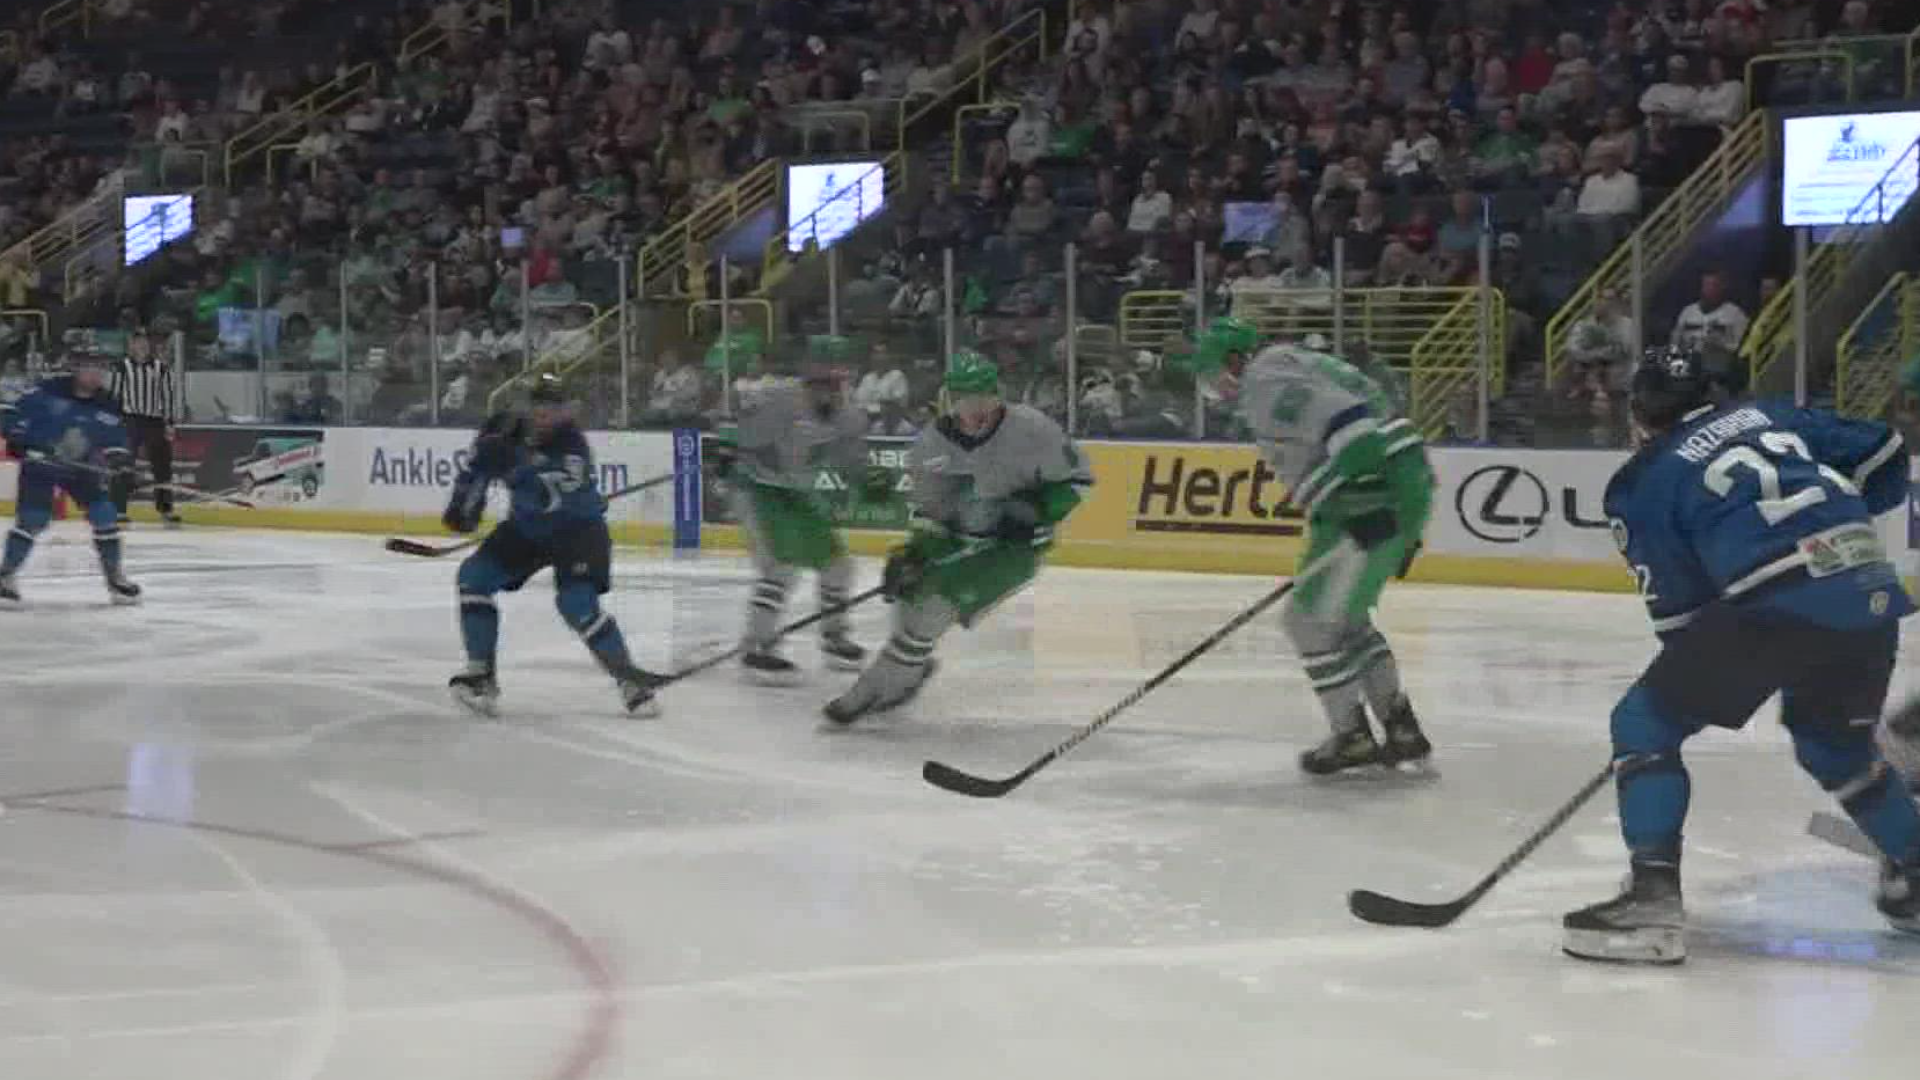 The Jacksonville Icemen must win two of their three home games to keep this series alive.